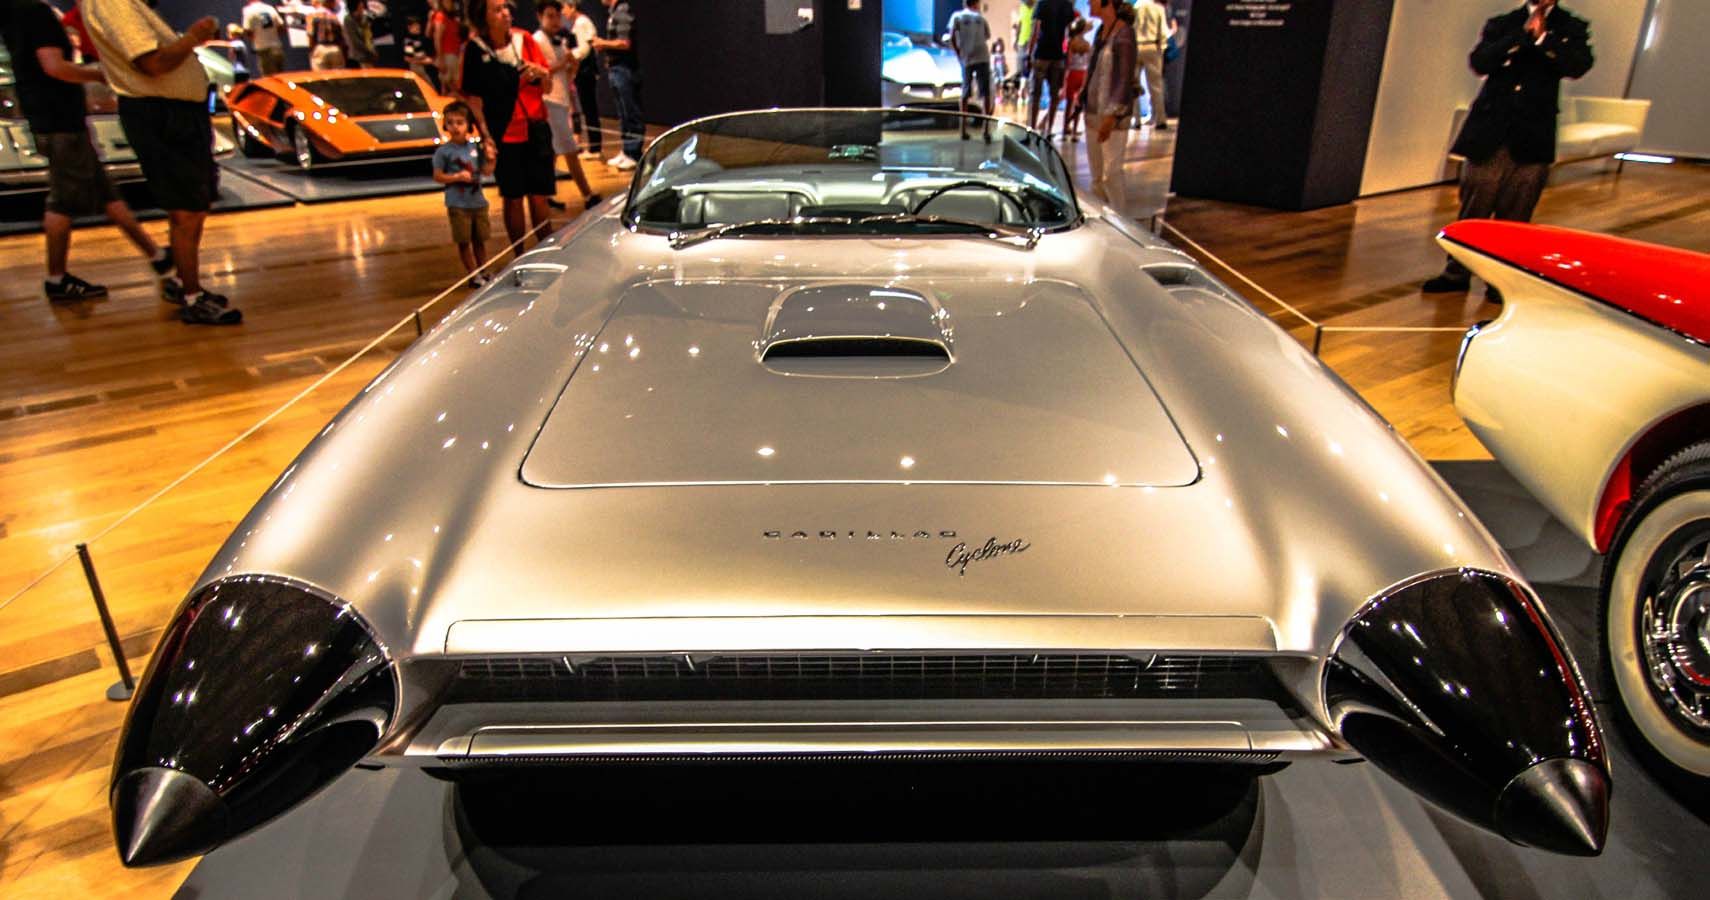 1959 Cadillac Cyclone Concept Car Has A Flip-Top Canopy Done Up In The Glass, Giving It A Bubble-Top Appearance And It Came Fully Powered